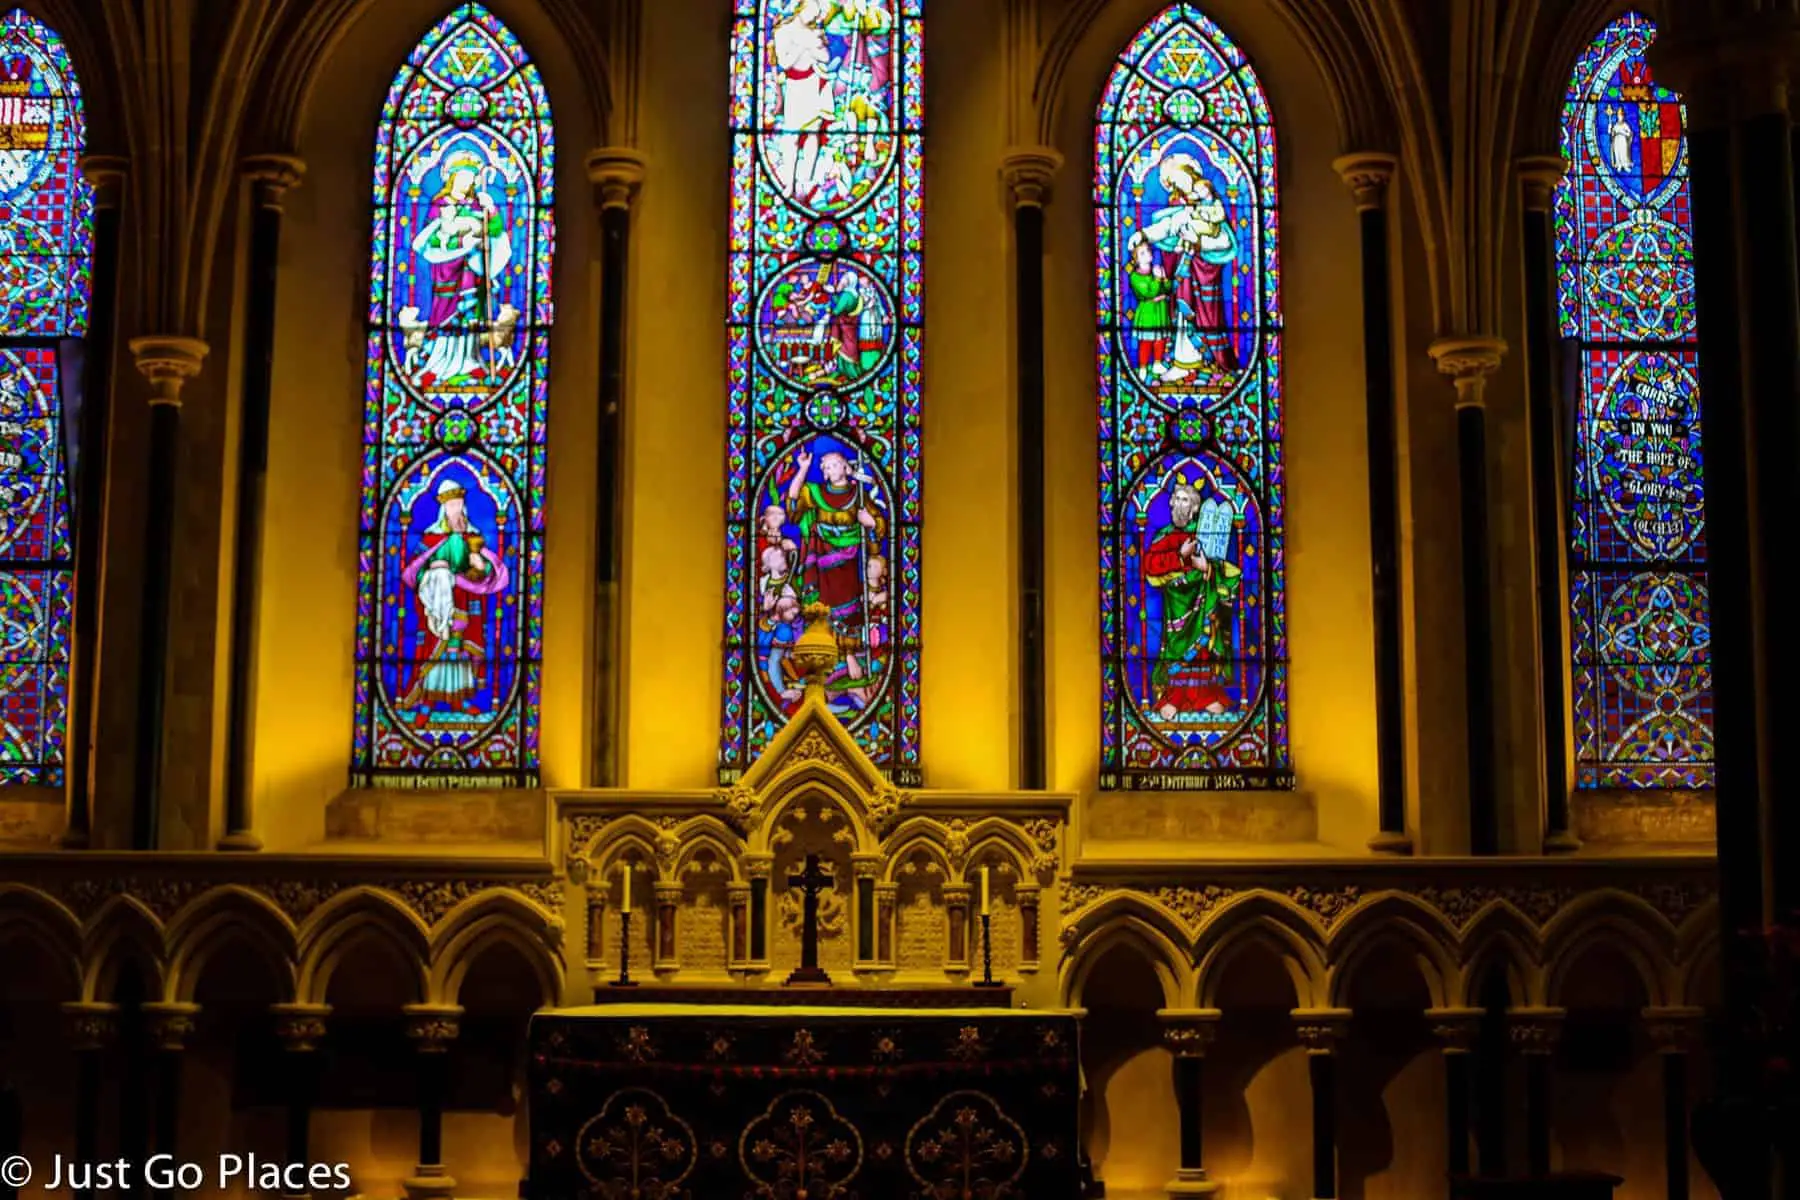 St. Patricks' Cathedral in Dublin